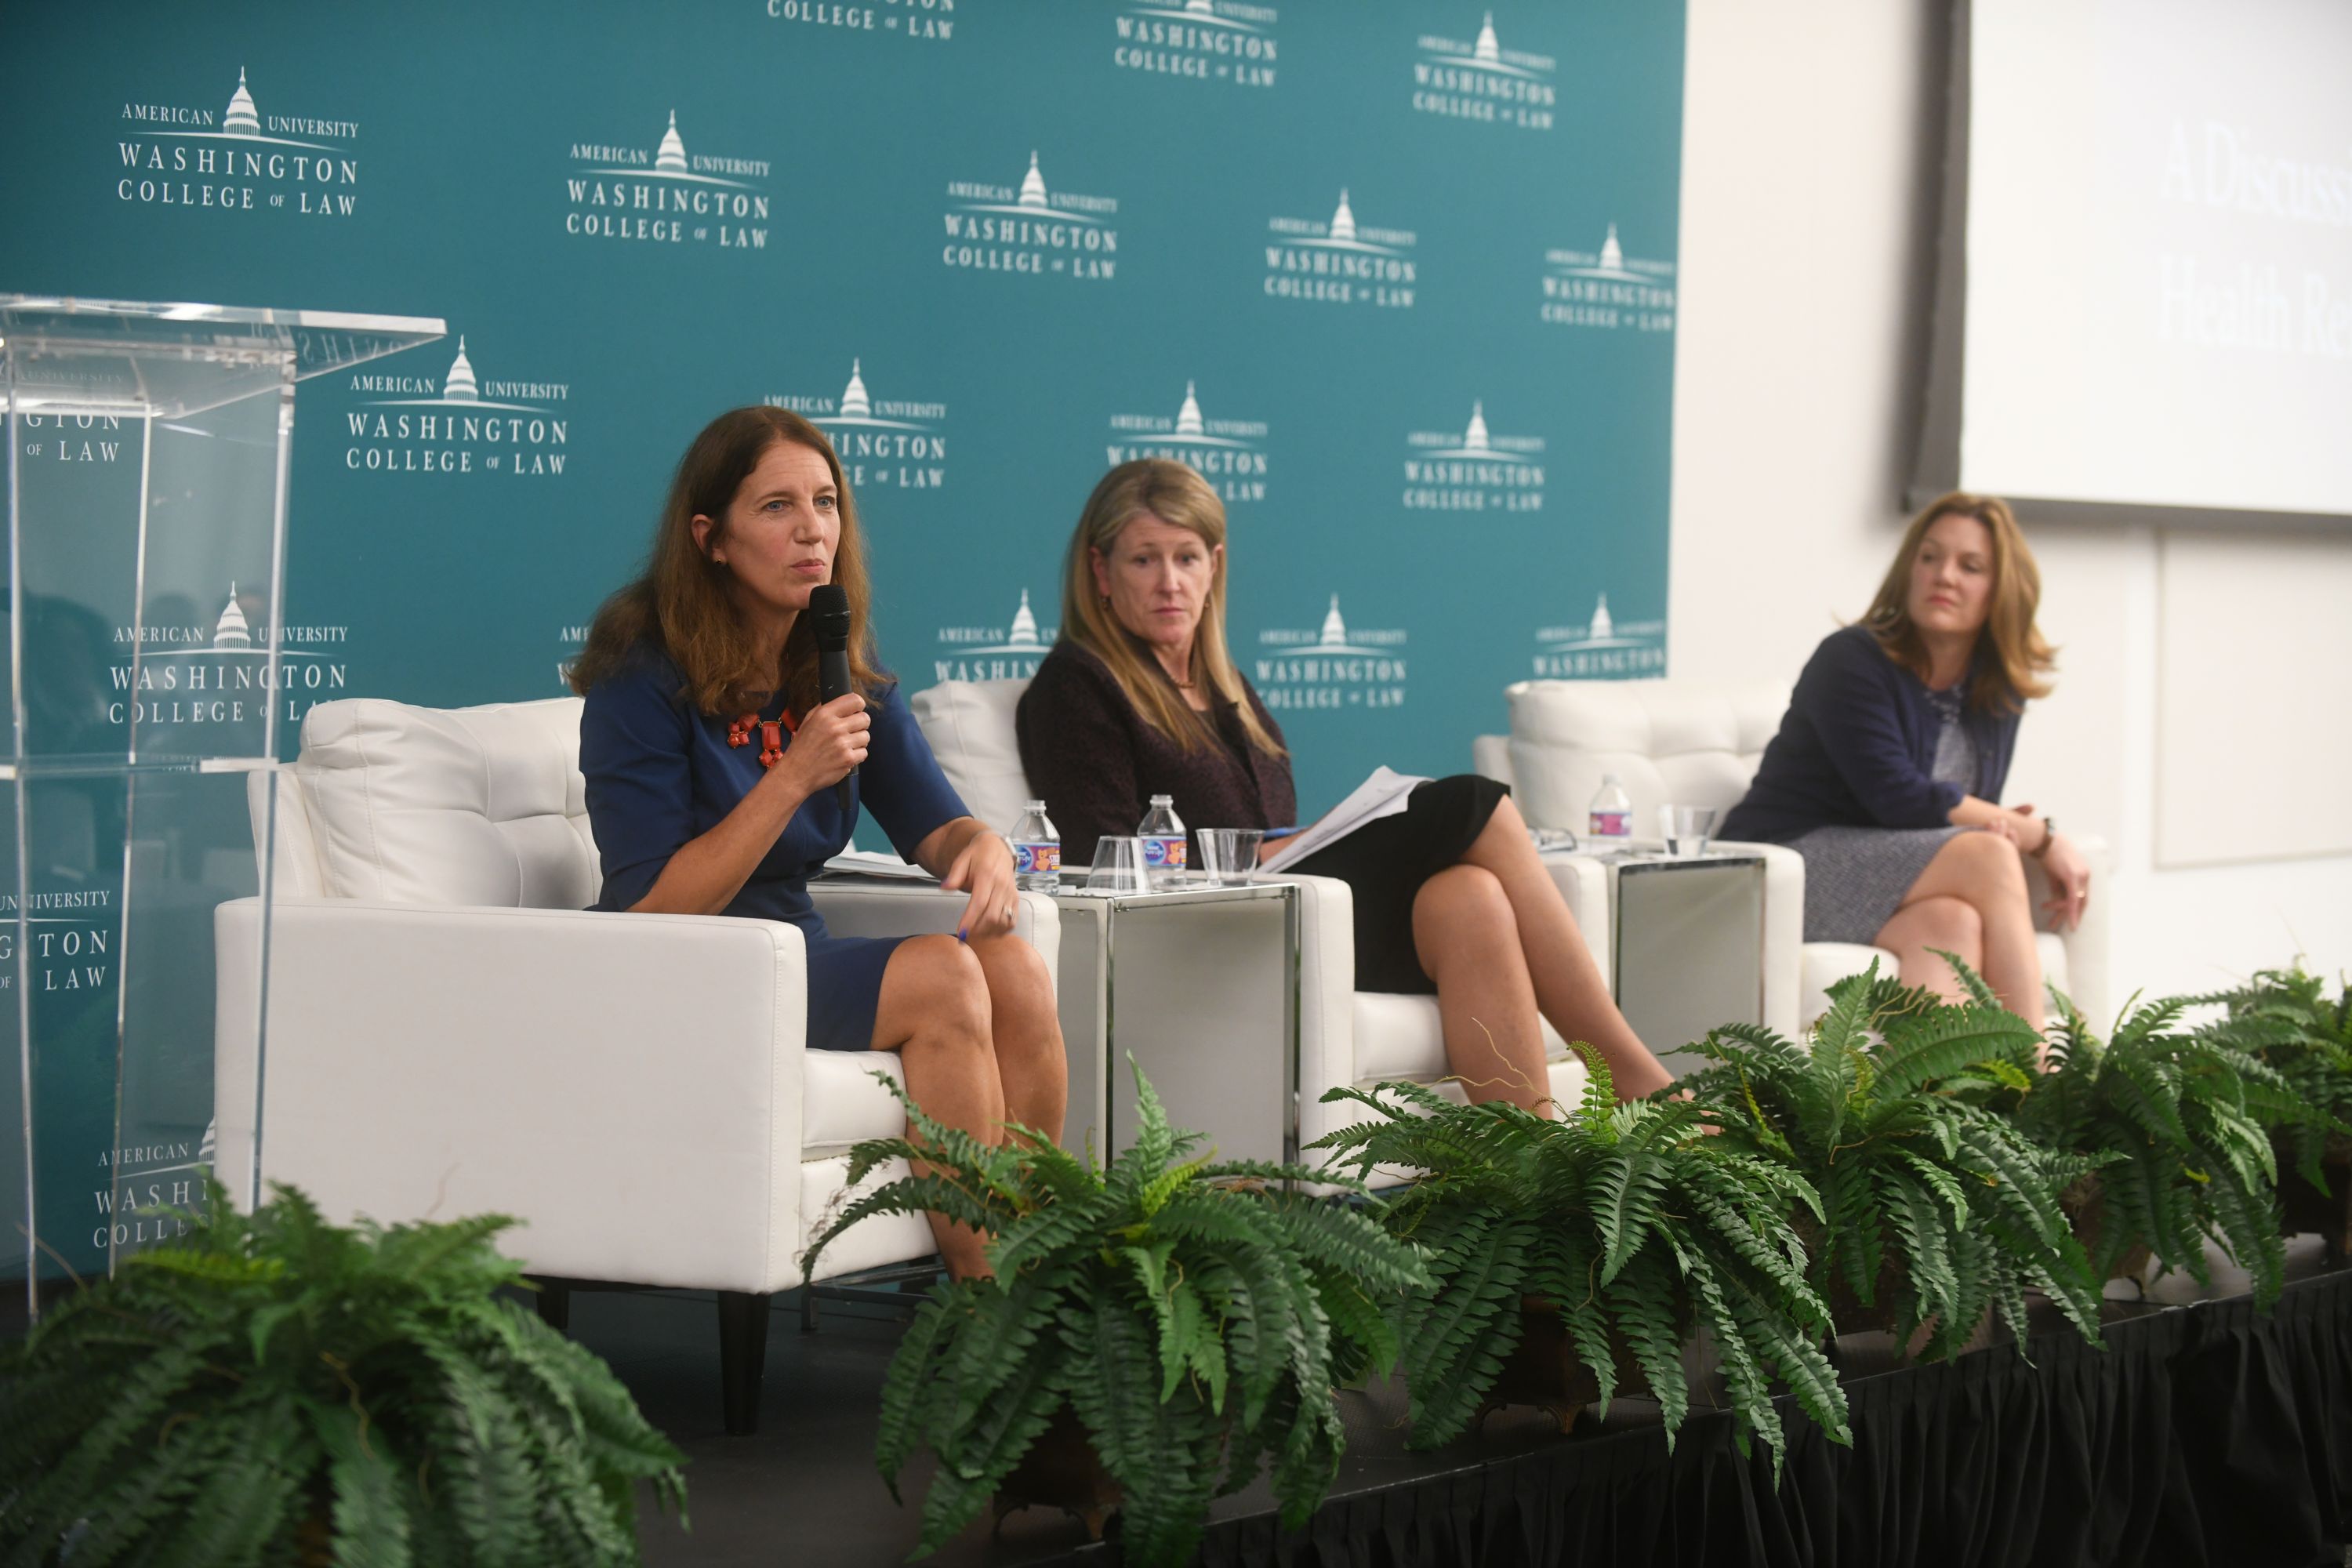 Former U.S. Secretary of Health and Human Services and American University President Sylvia M. Burwell leads a plenary session with Maine Health and Human Services Commissioner Jeanne Lambrew and Wisconsin Secretary of Health Services Andrea Palm. 